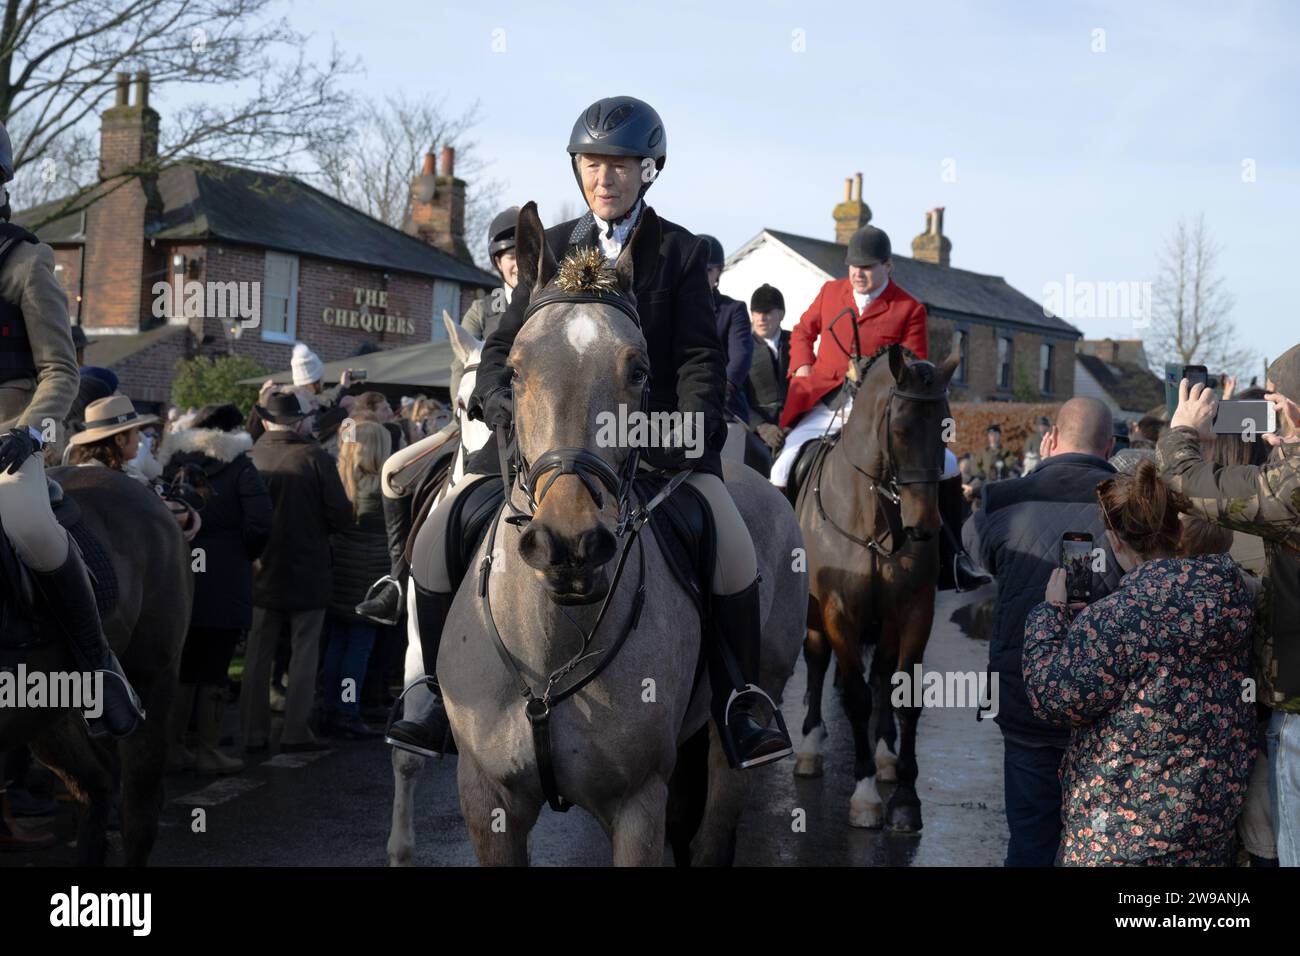 Essex with Farmers and Union Hunt Hundreds of people attend as the Essex with Farmers and Union Hunt sets off for it s annual Boxing Day ride from the Chequers Pub in the rural Essex village of Matching Green UK. The Essex Hunt has met regularly in Matching Green since the early 19th century, although since the 2004 Hunting Act it has not been allowed to use dogs to chase and kill foxes. Matching Green Essex UK Copyright: xMartinxDaltonx Essex Hunt 261223 MD 268 Stock Photo